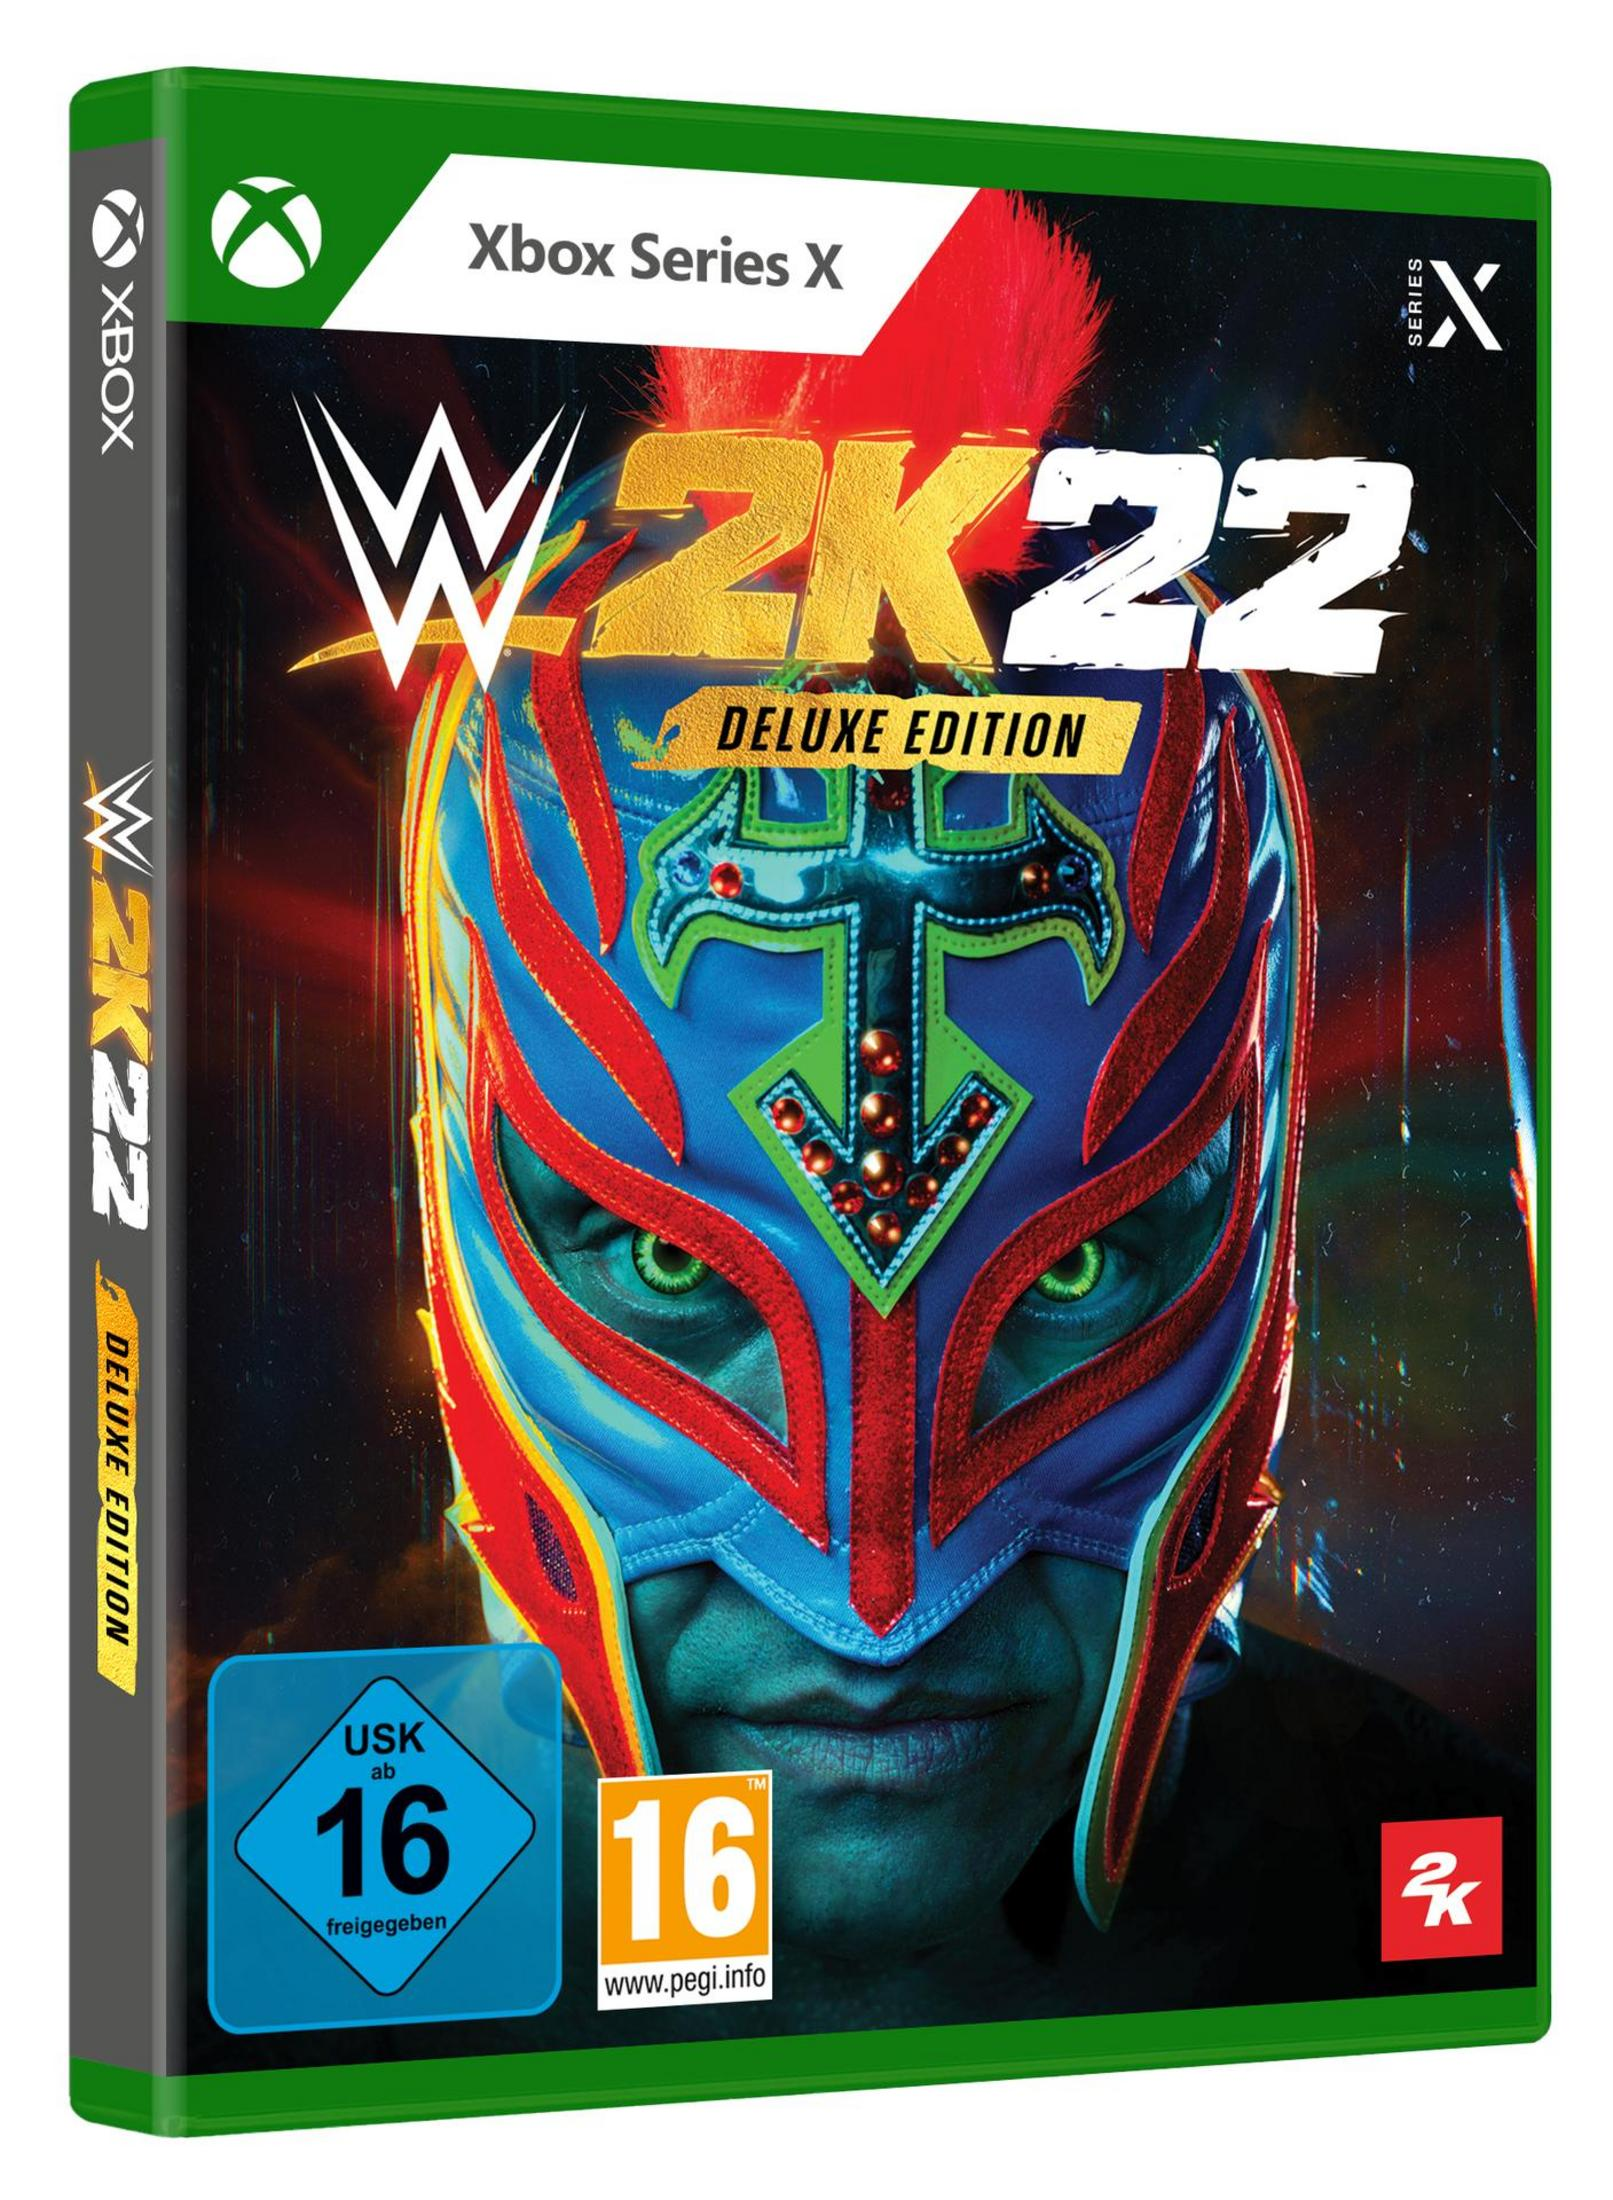 WWE 2K22 - Deluxe Edition - Series X|S] [Xbox